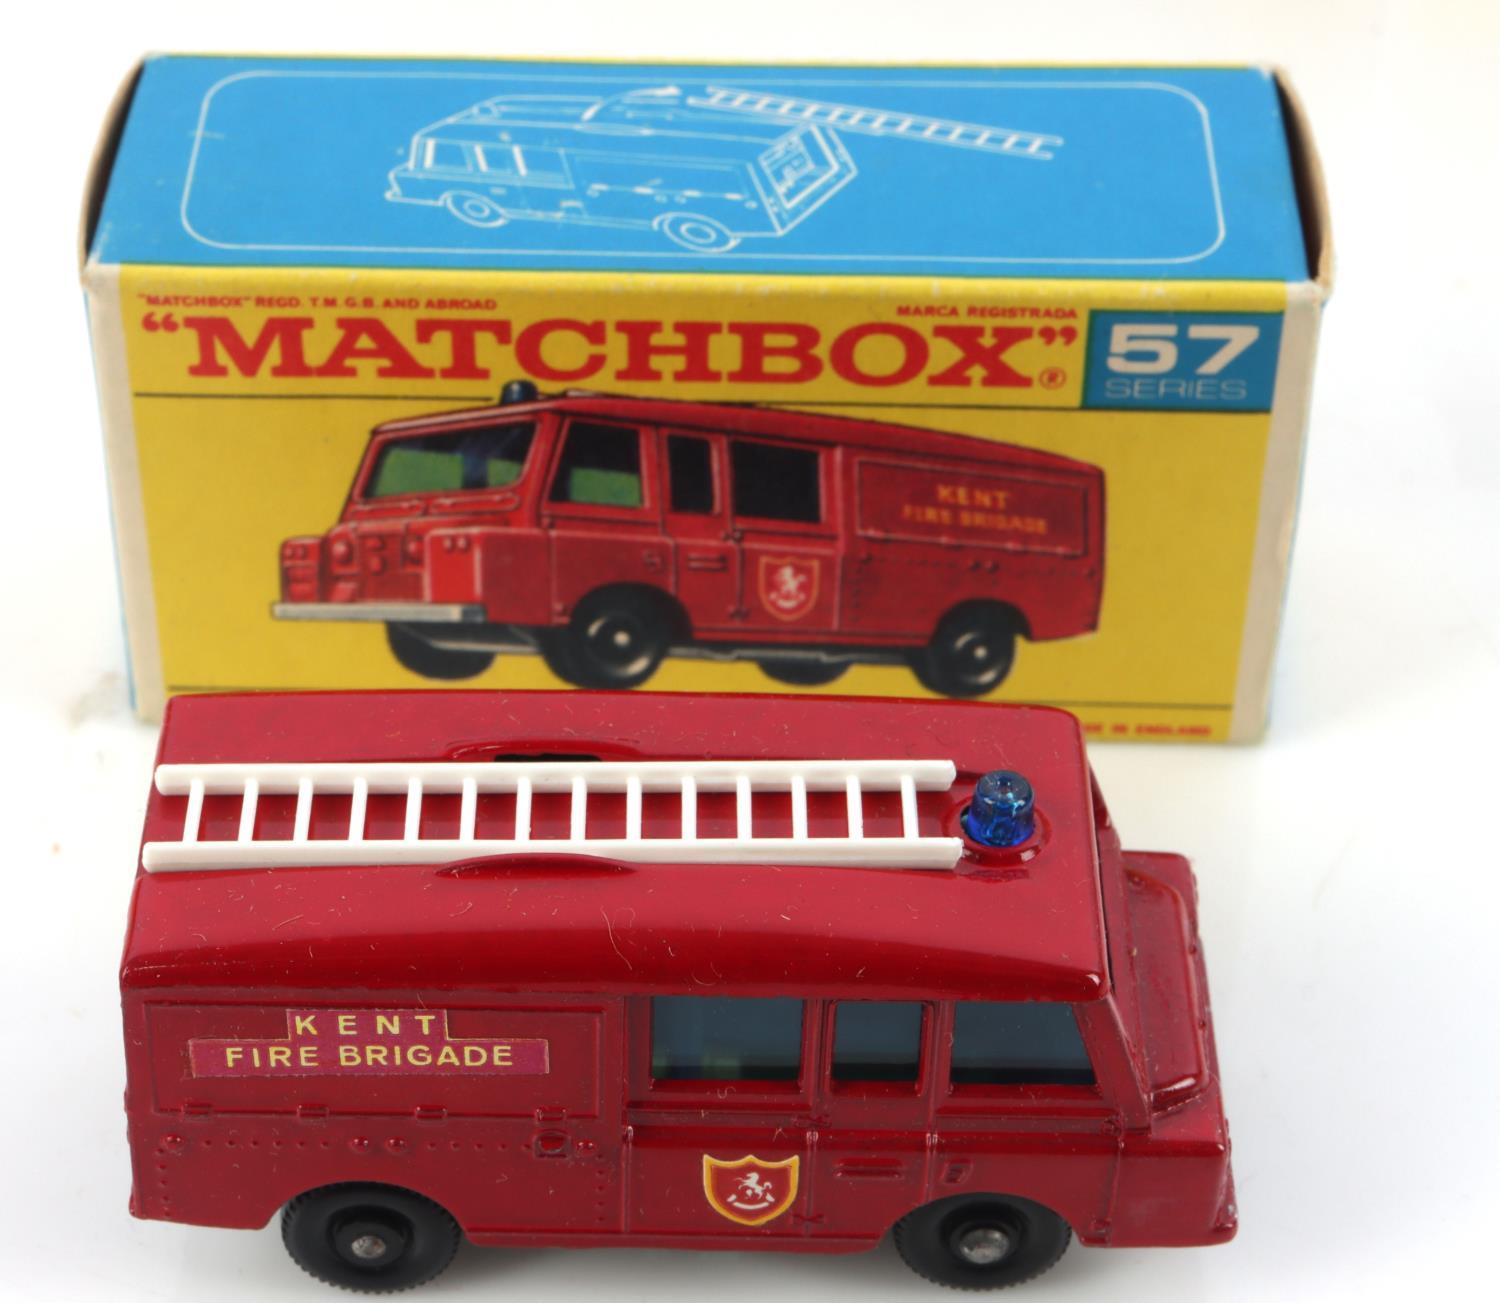 7 VINTAGE 1960S MATCHBOX TOY CARS WITH BOXES